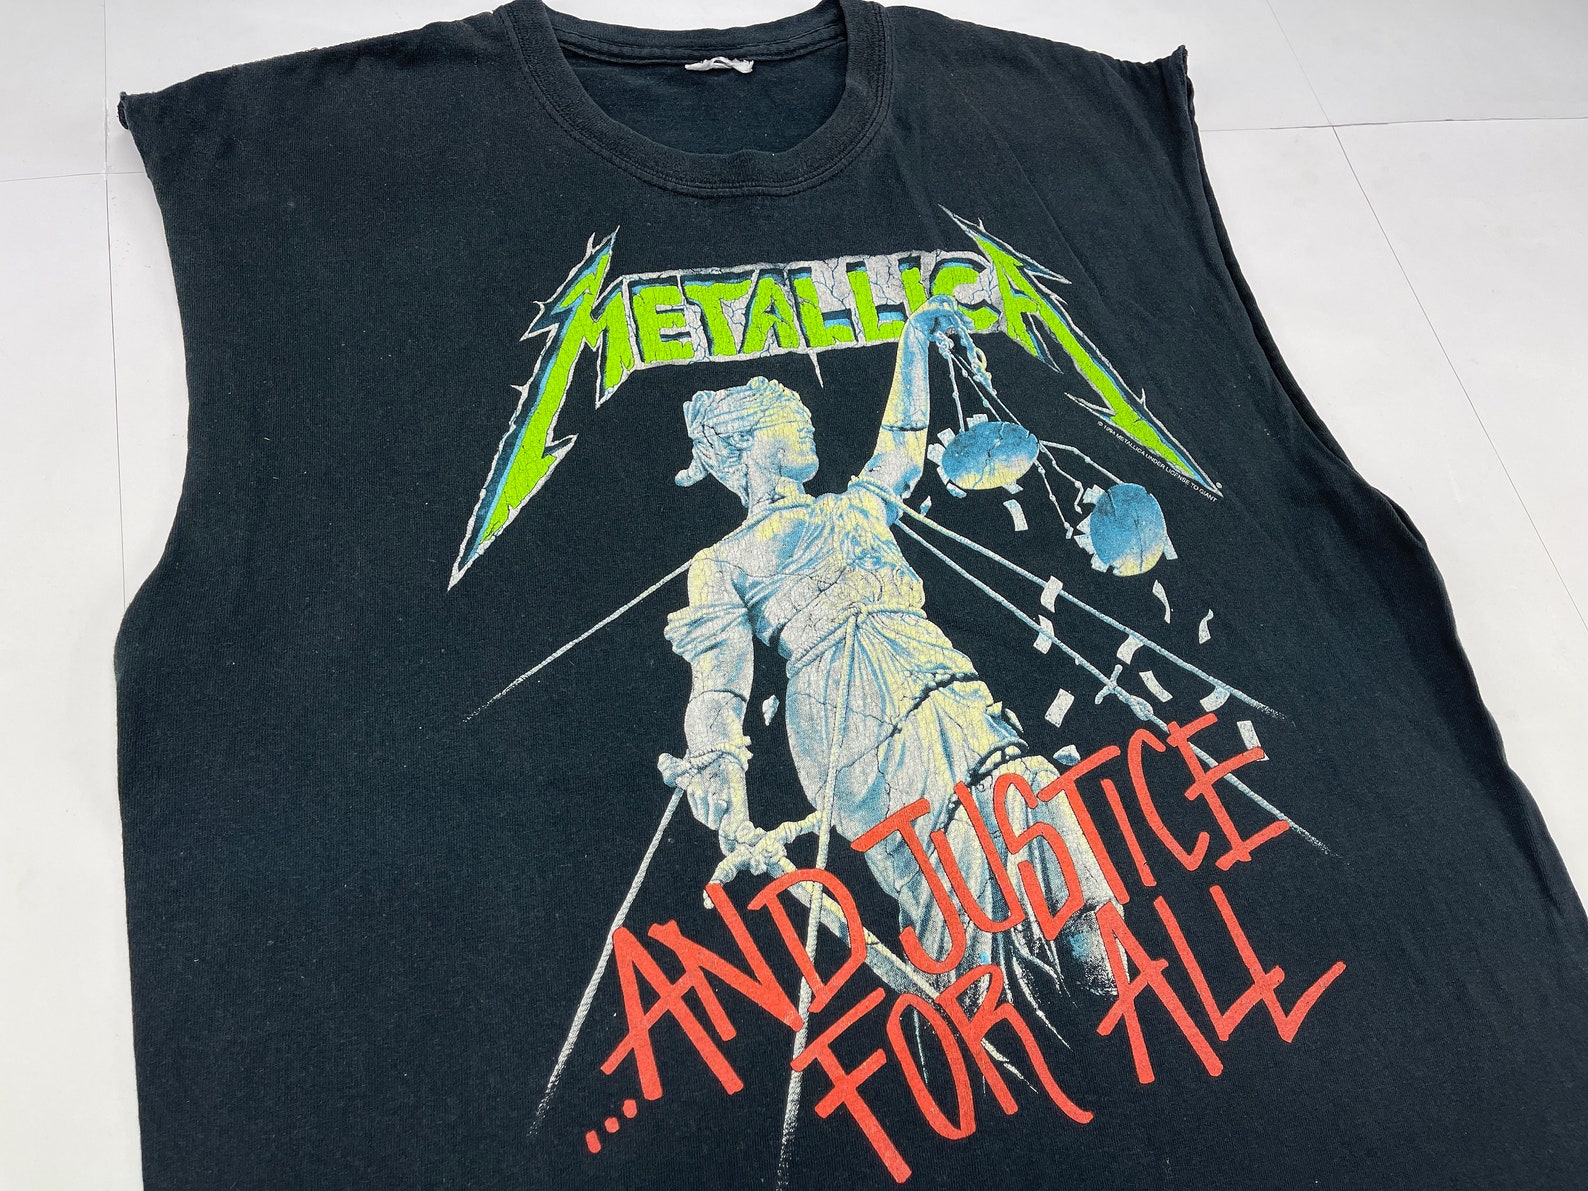 Vintage METALLICA T-shirt and Justice for All Ride the | Etsy